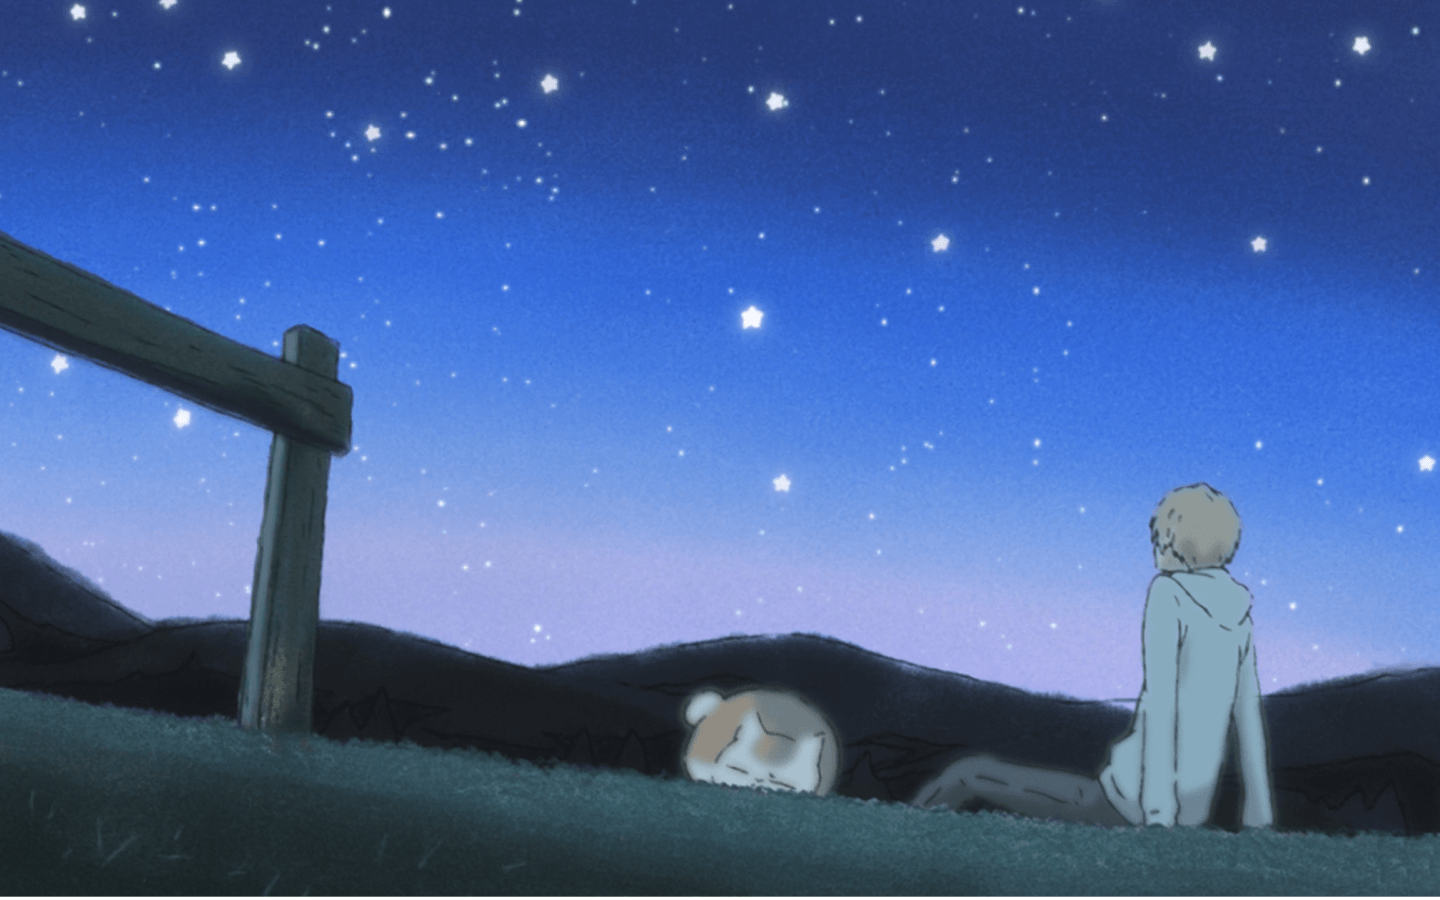 Thought I'd share some wallpaper I made from the Natsume Yuujinchou